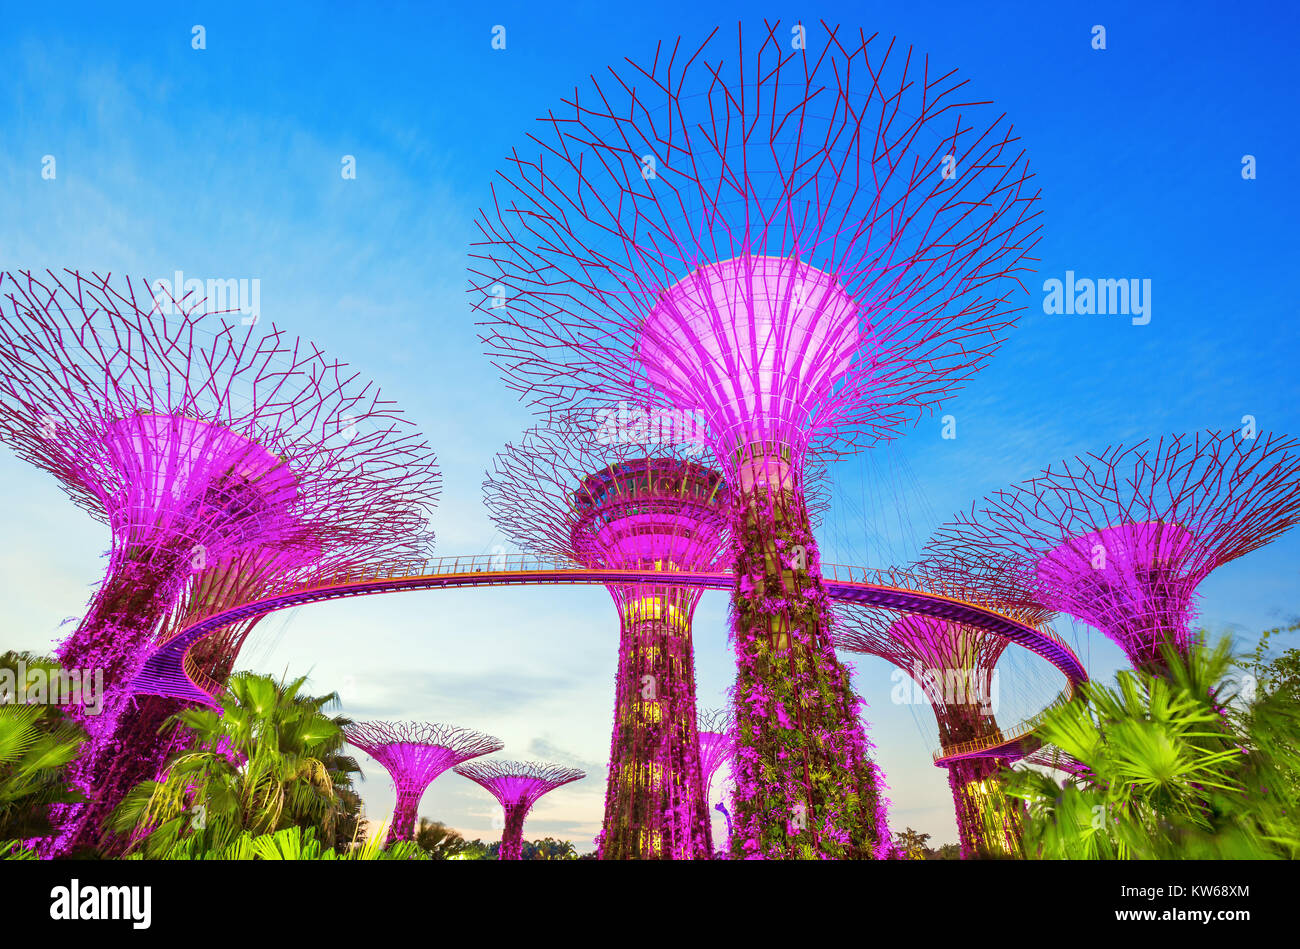 Supertrees at Gardens by the Bay. The tree  structures are fitted with environmental technologies, Singapore Stock Photo